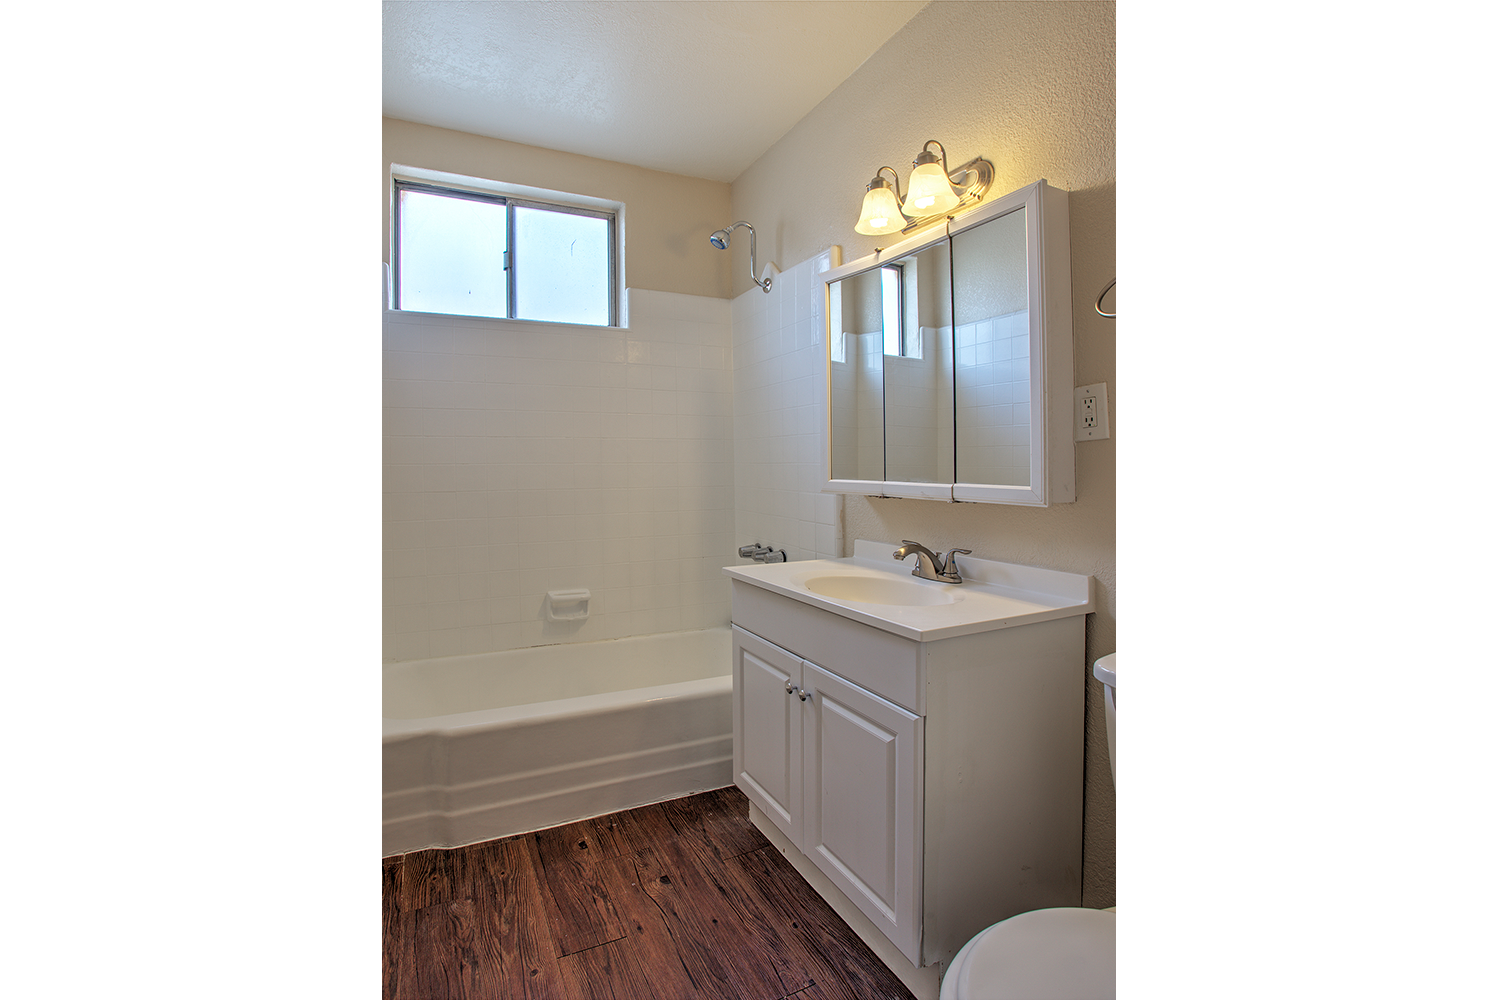 Updated bathroom at 14517 Larch